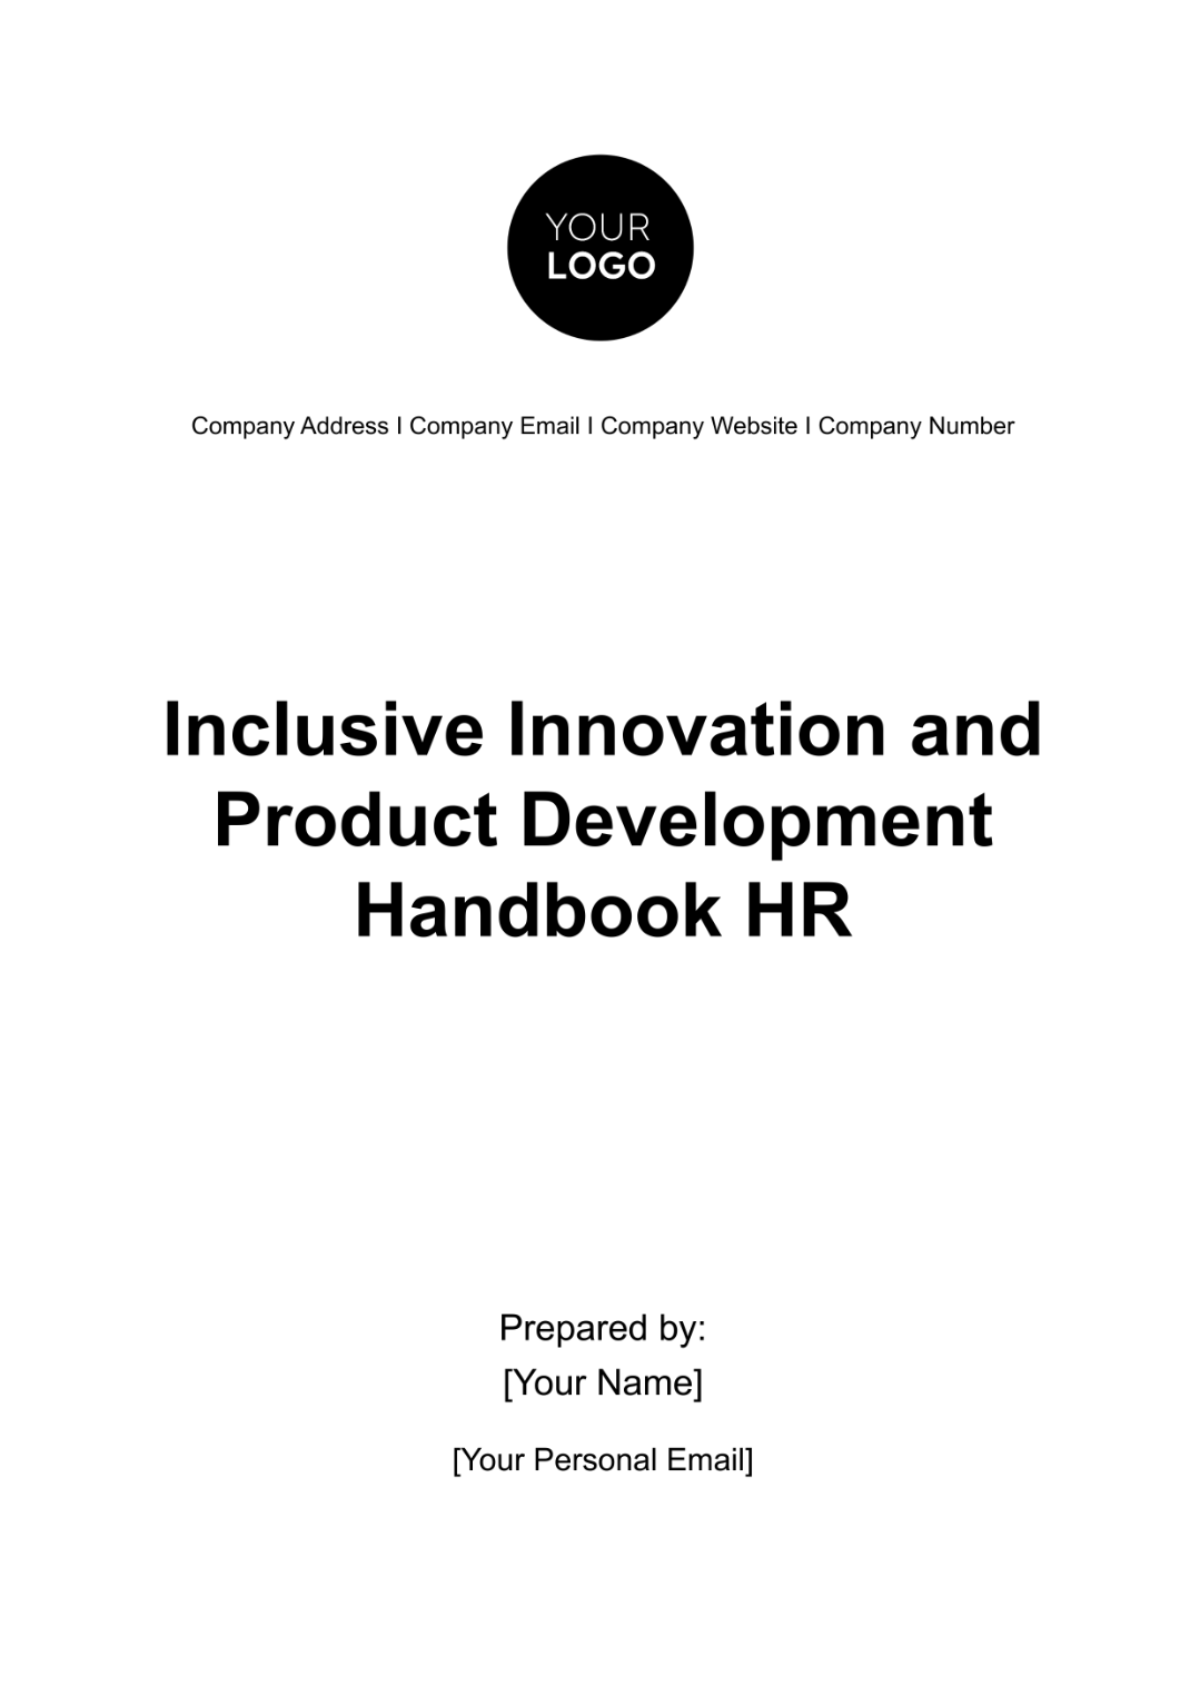 Free Inclusive Innovation and Product Development Handbook HR Template